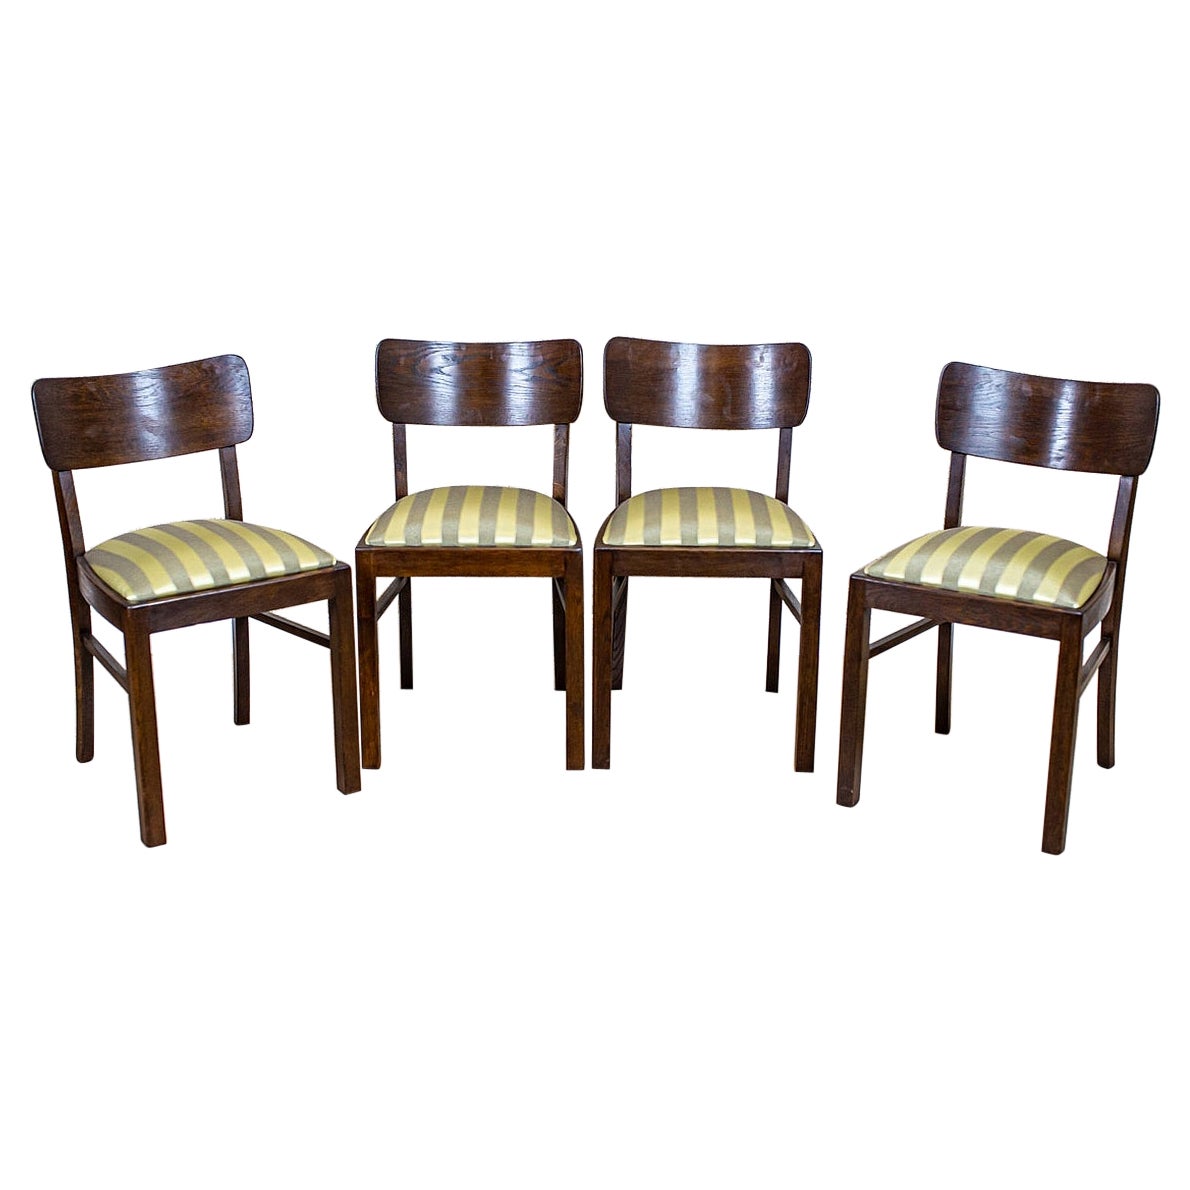 Four Art Deco Thonet Oak Chairs in Striped Upholstery For Sale